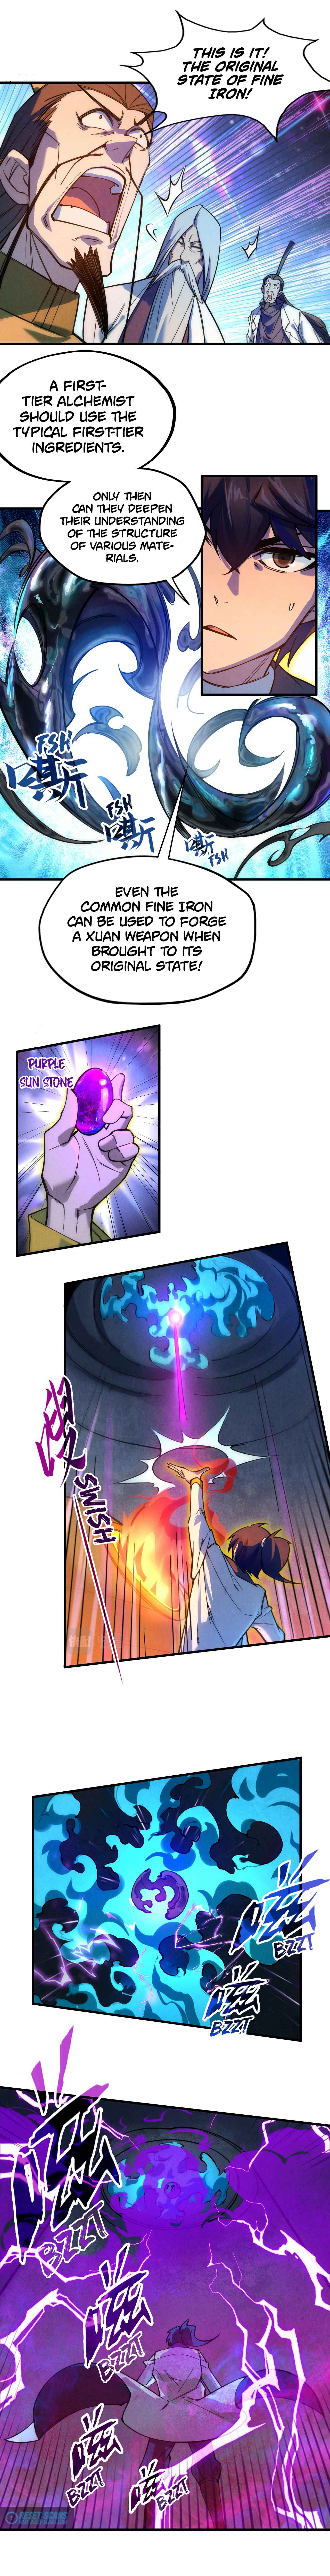 The Eternal Supreme - Page 2